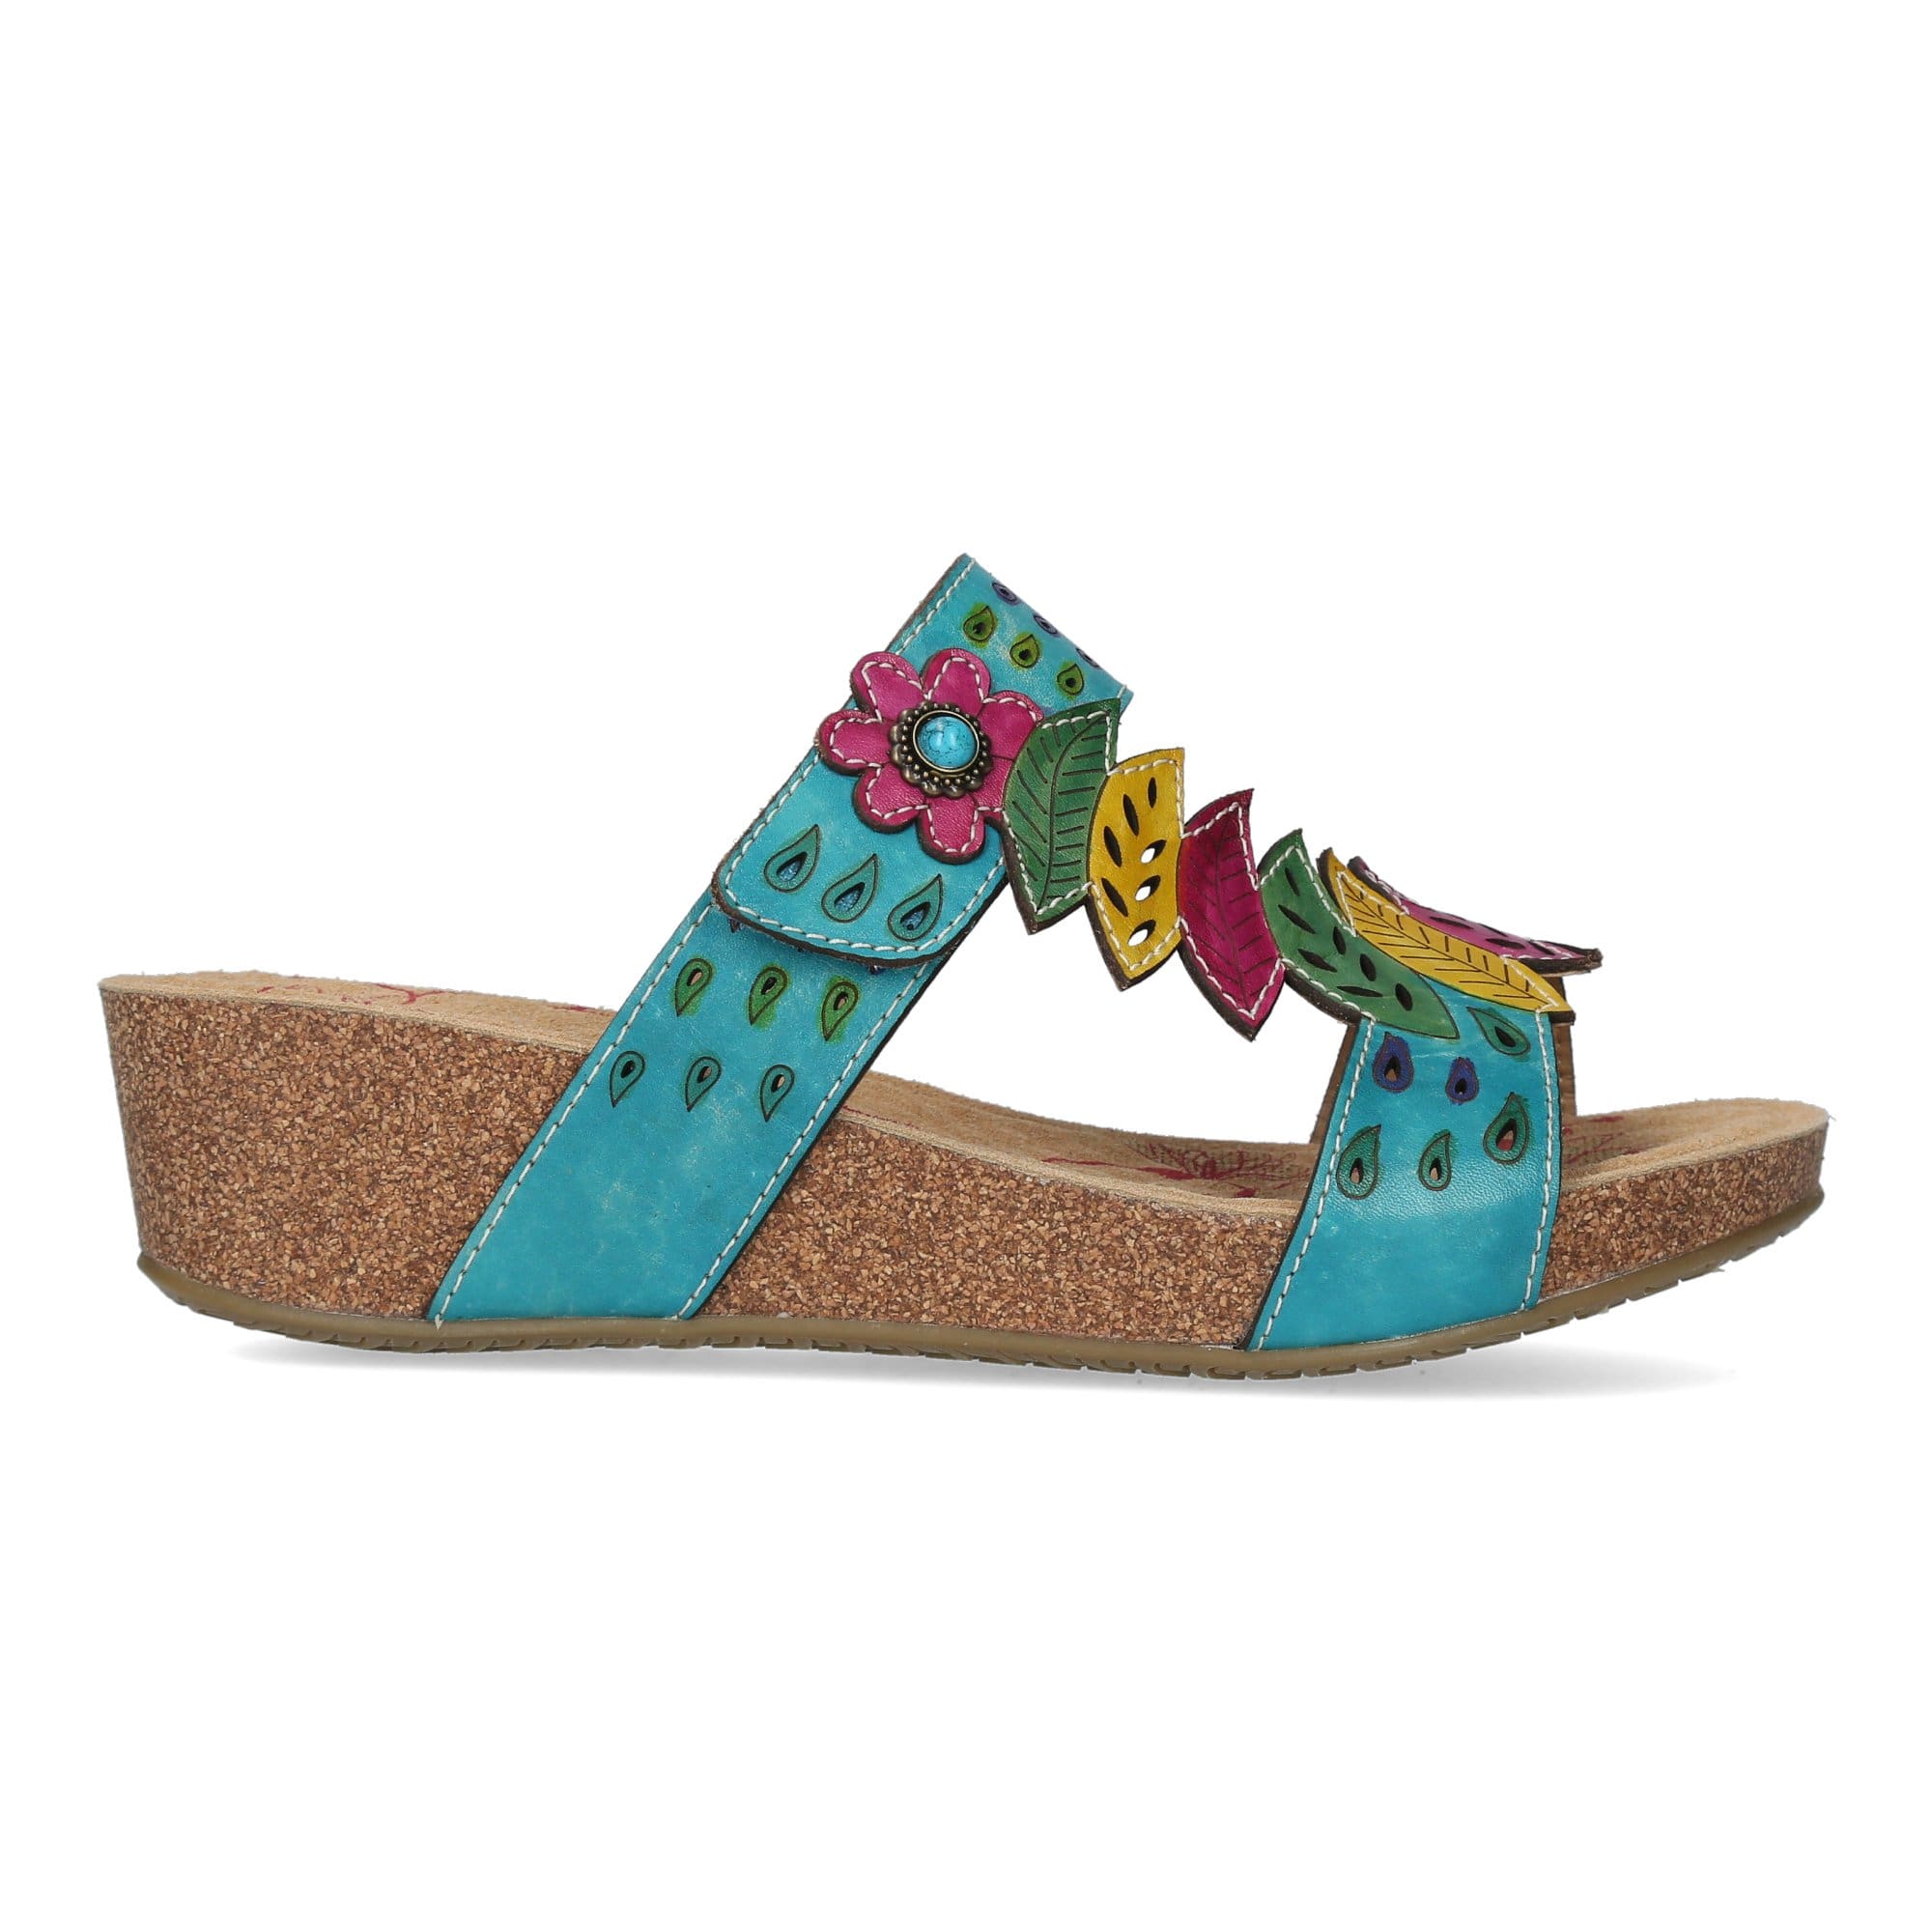 Chaussures BICNGOO 12 - 35 / Turquoise - Mule